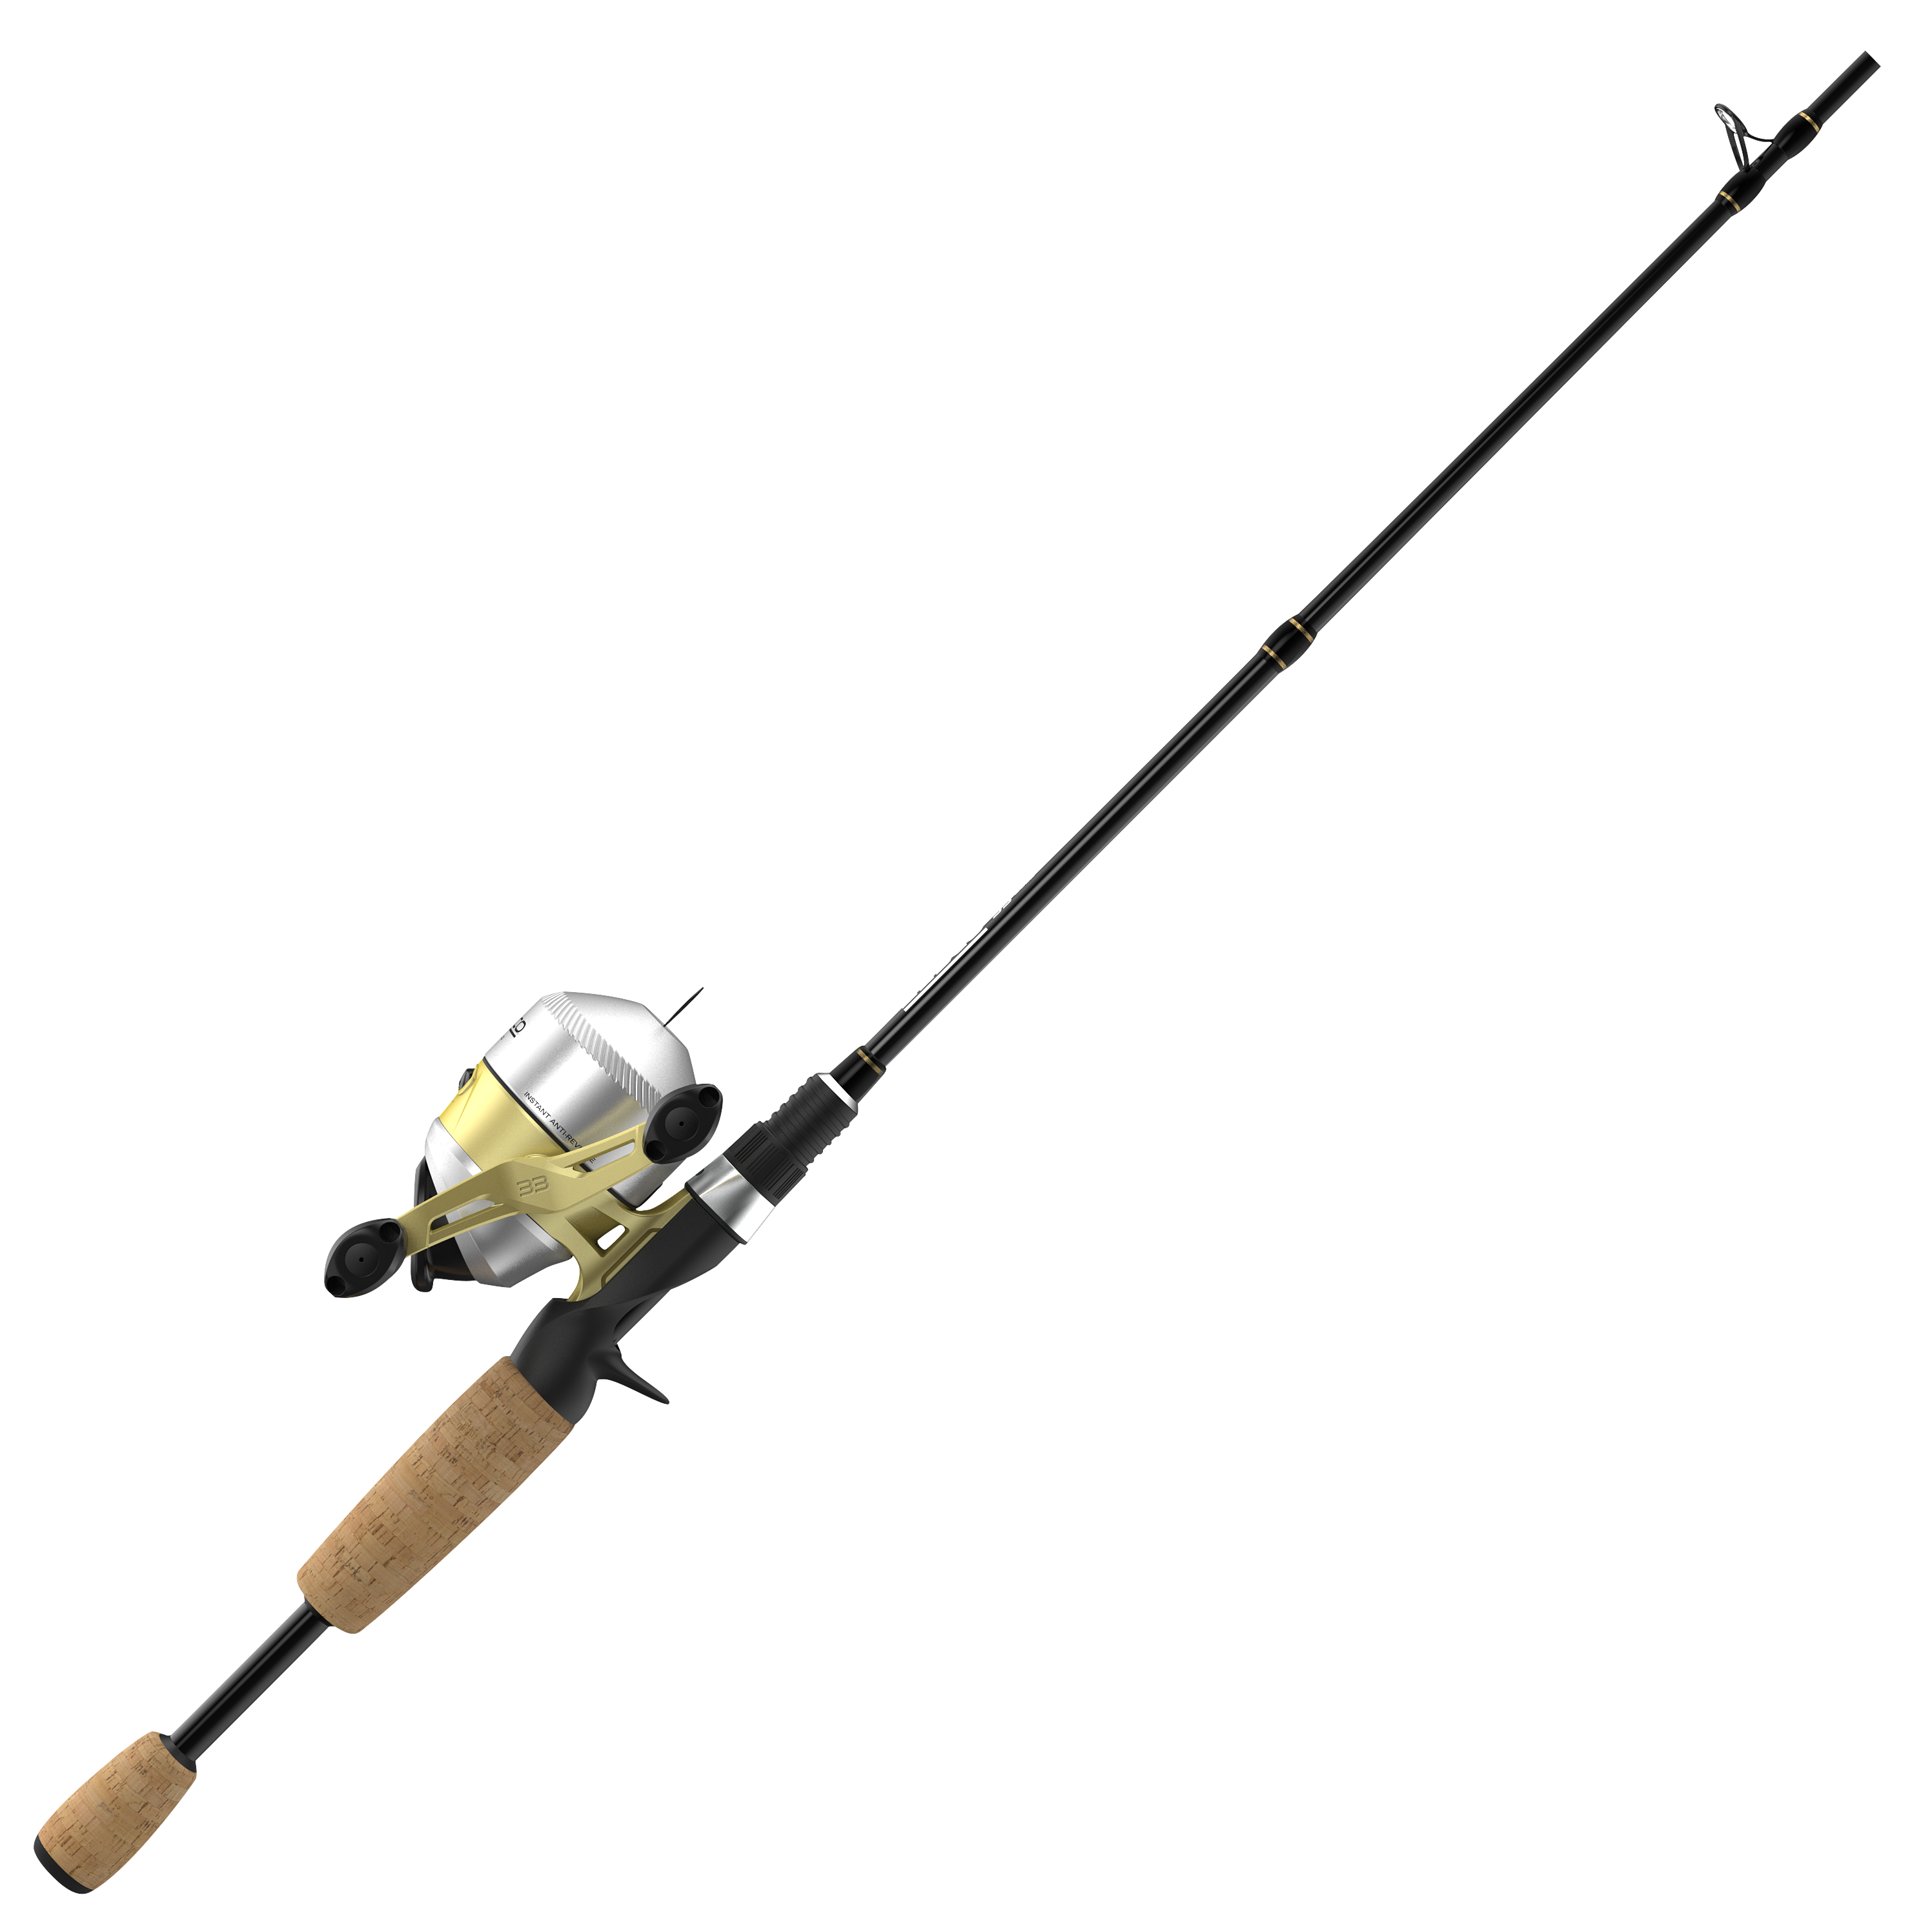 Zebco Spincast Combo Trout Fishing Rod & Reel Combos for sale